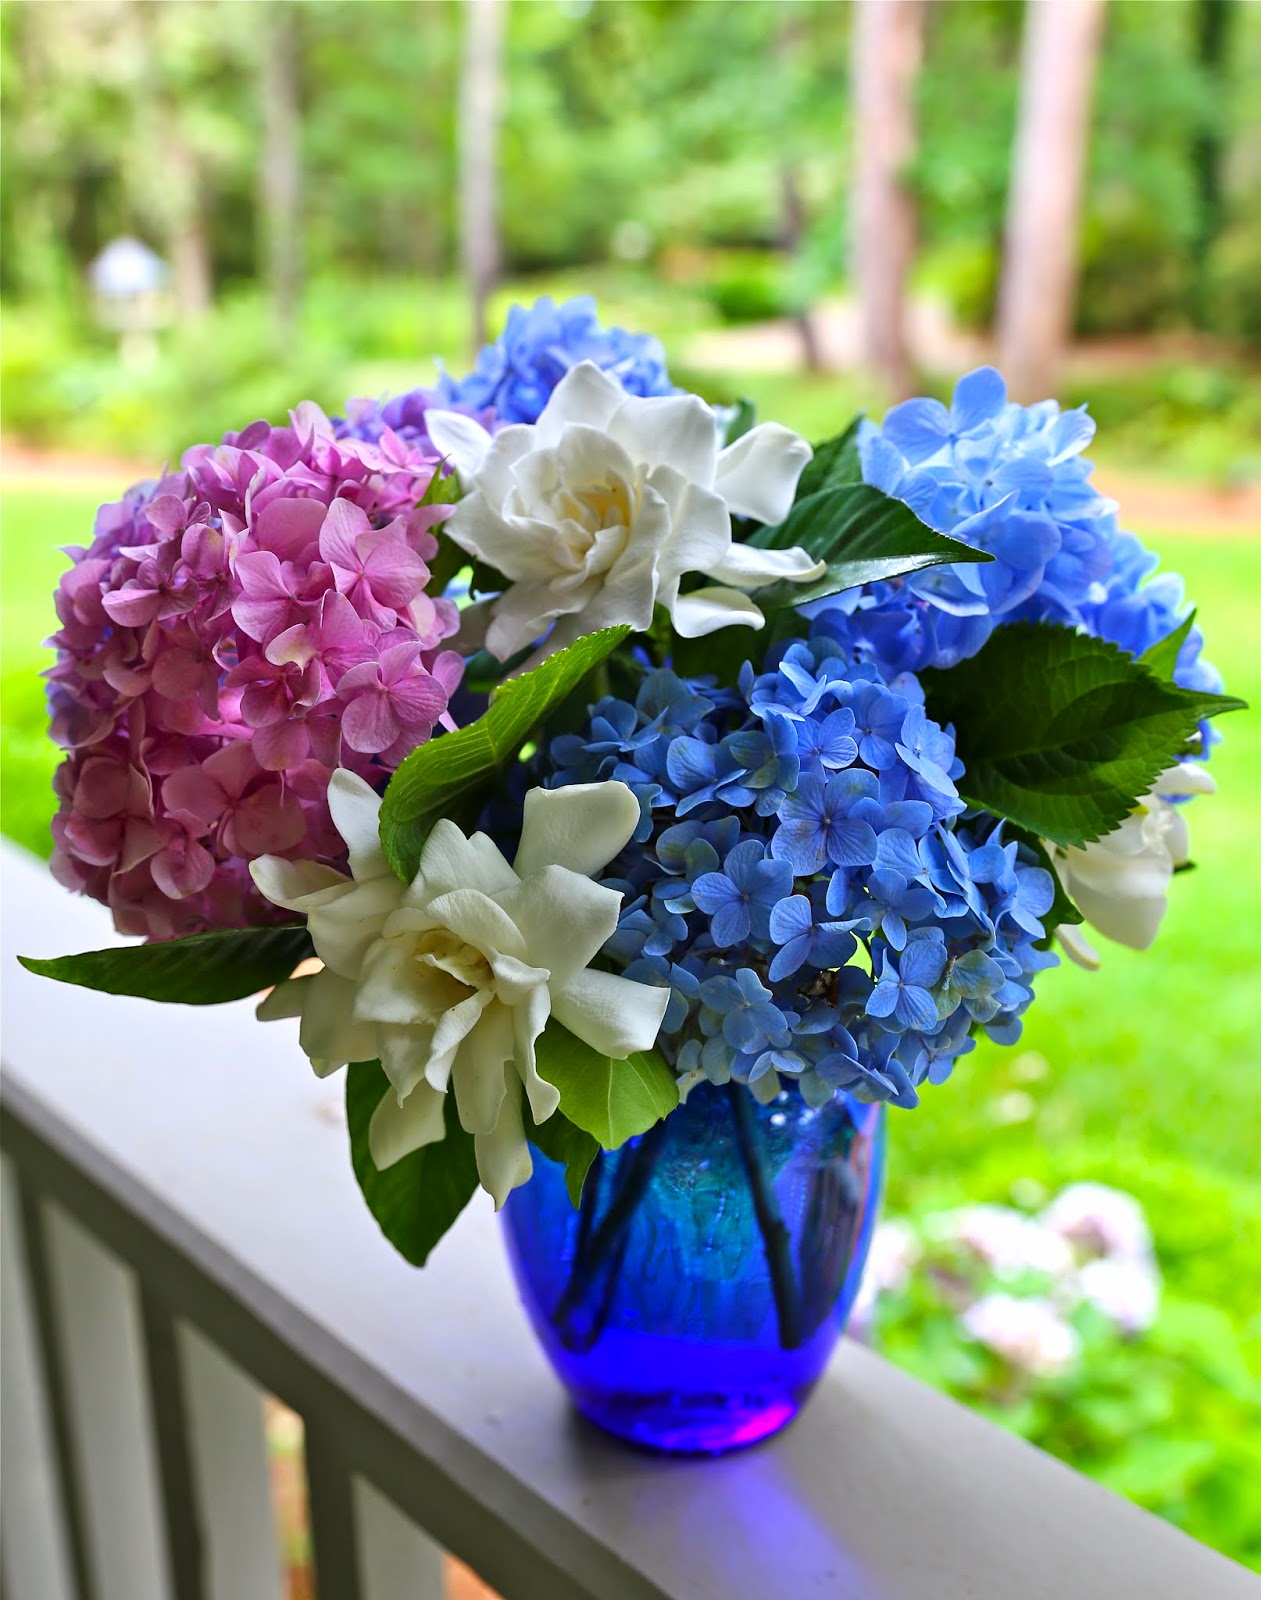 Sweet Southern Days: The Hydrangeas and Gardenias Are Blooming